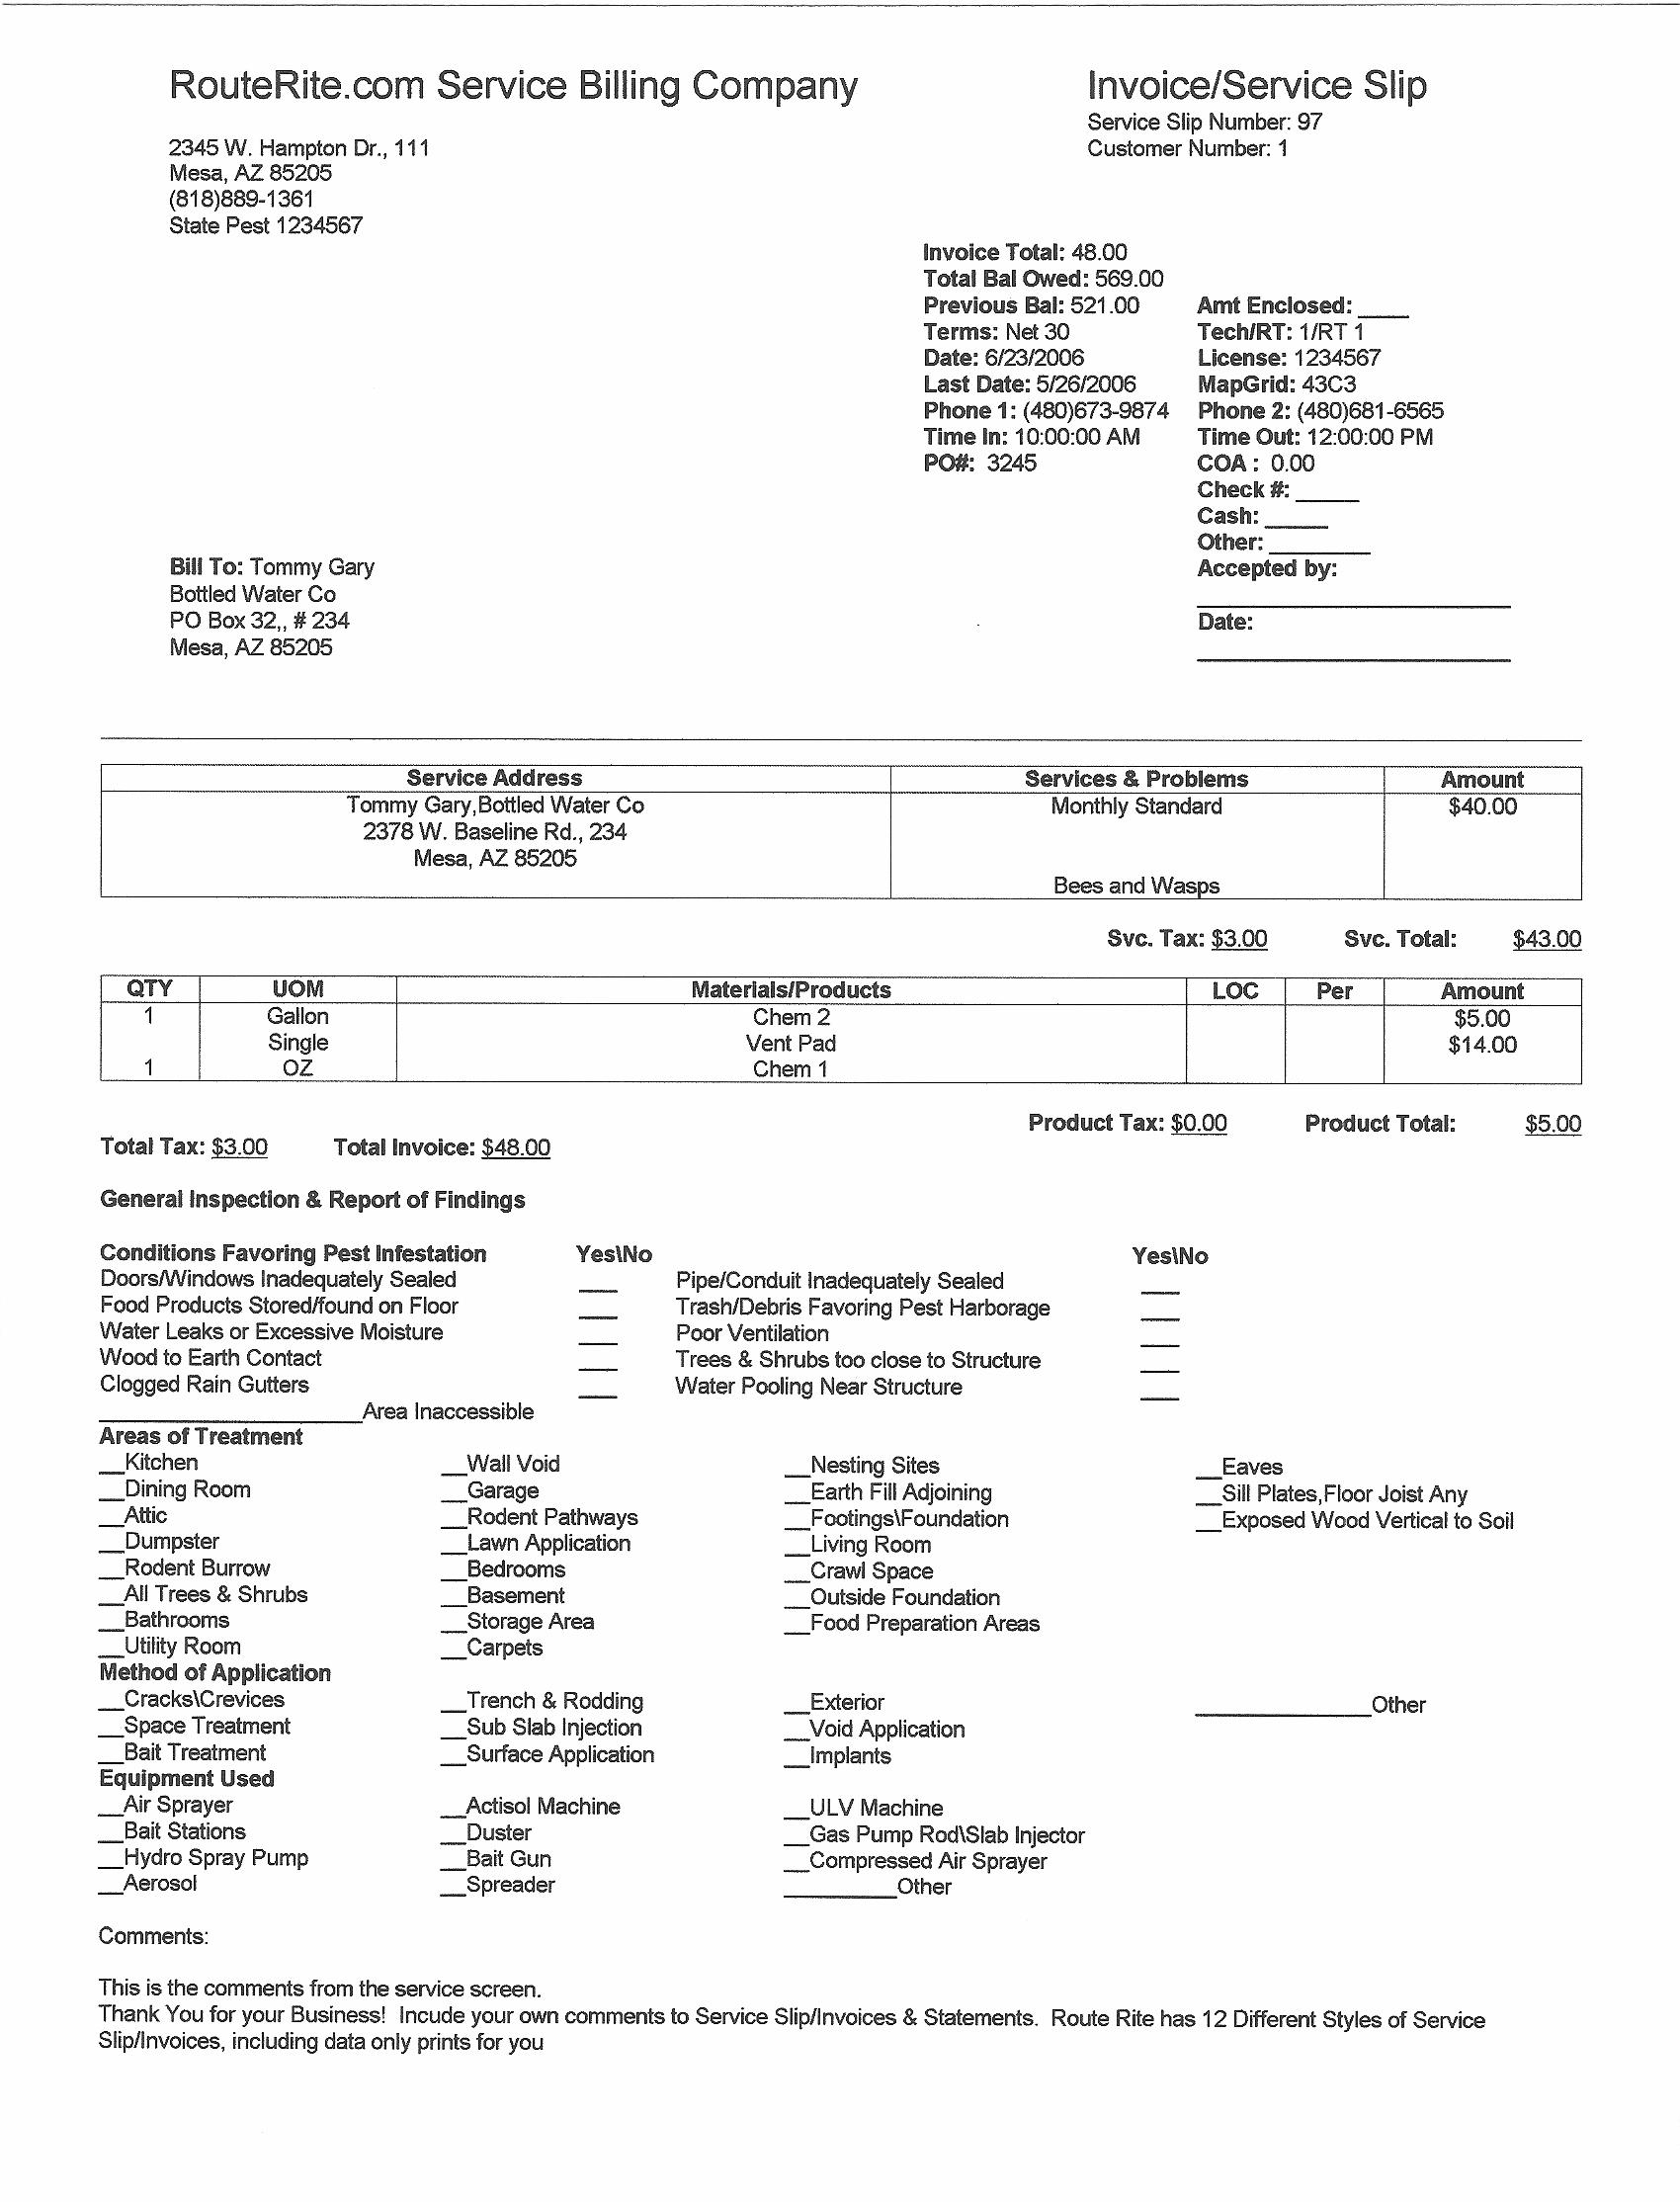 service forms in route rite software pest control invoice